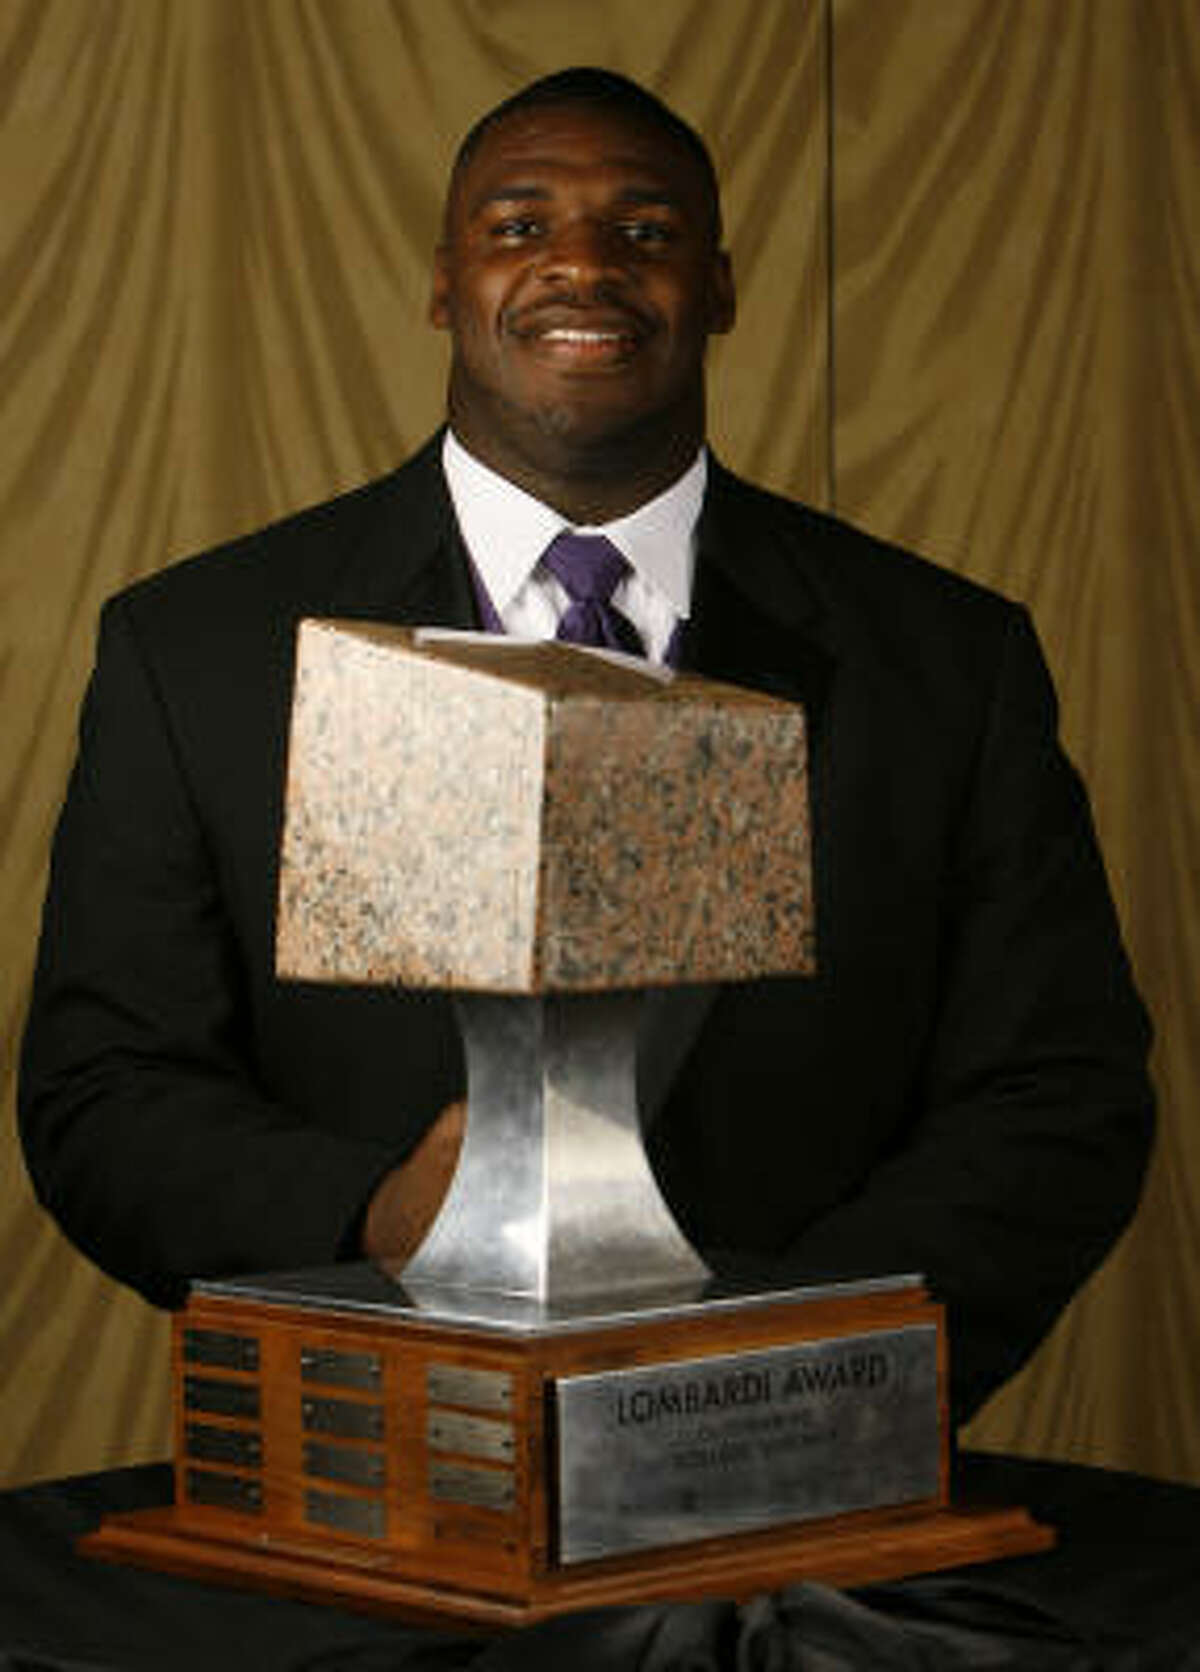 LSU defensive tackle Glenn Dorsey was awarded the Lombardi Trophy Wednesday at the Hilton Americas.